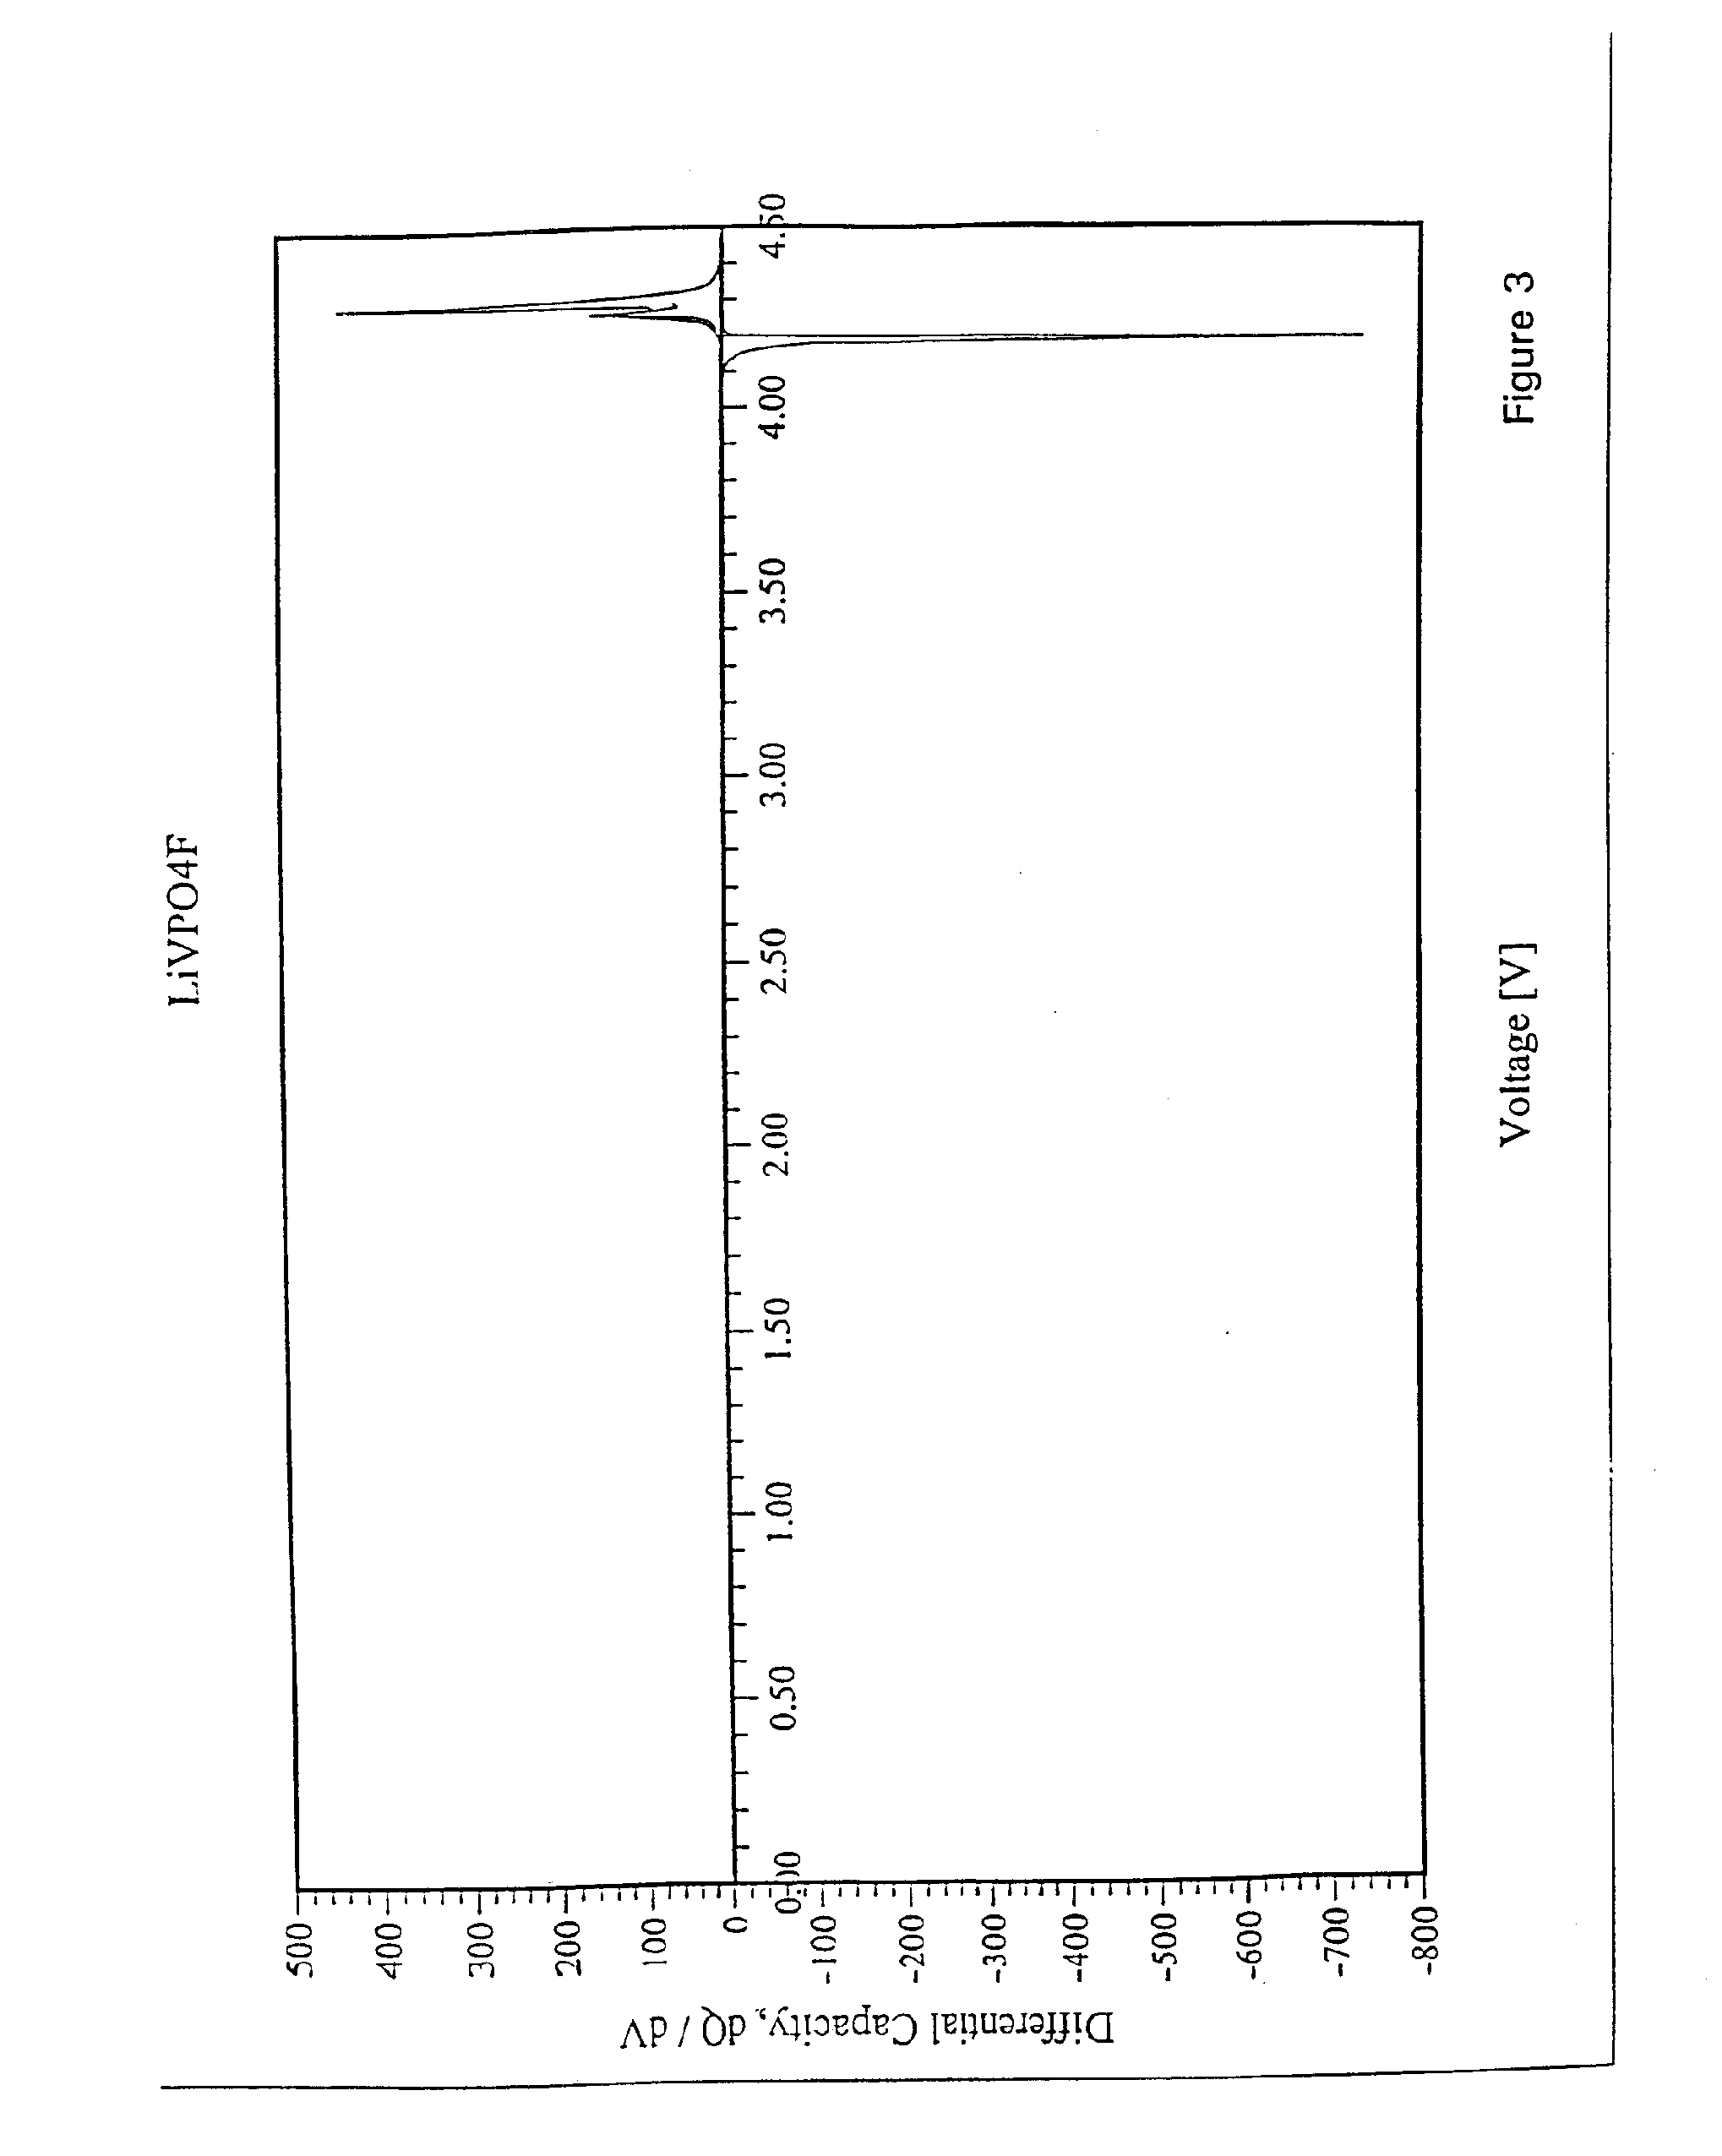 Lithium metal fluorophosphate and preparation thereof